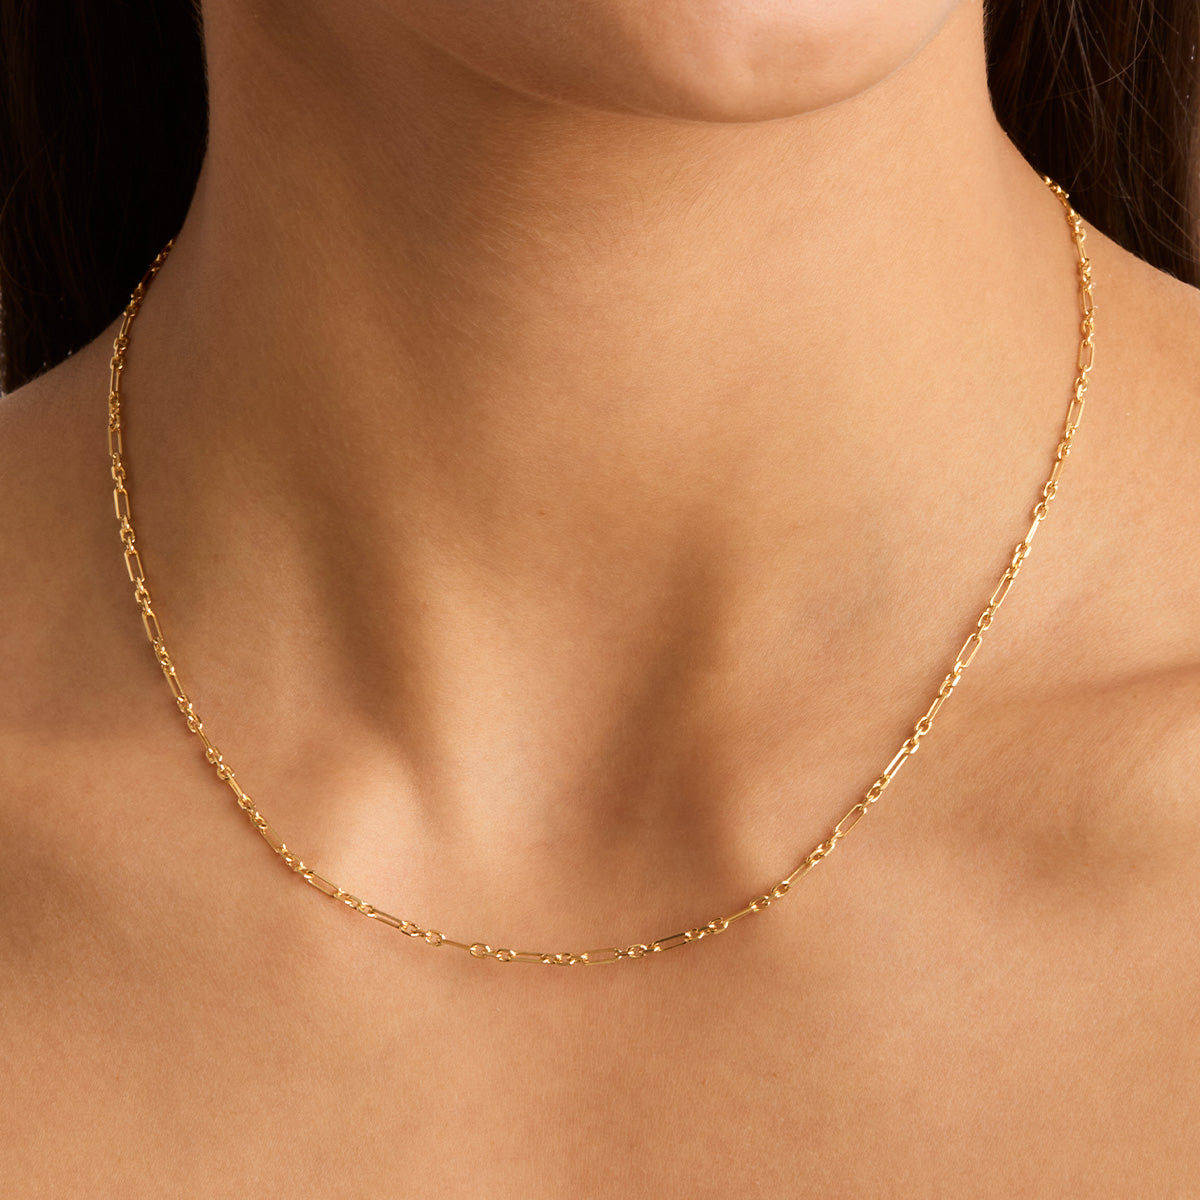 19" Mixed Llnk Chain Necklace Gold and Silver